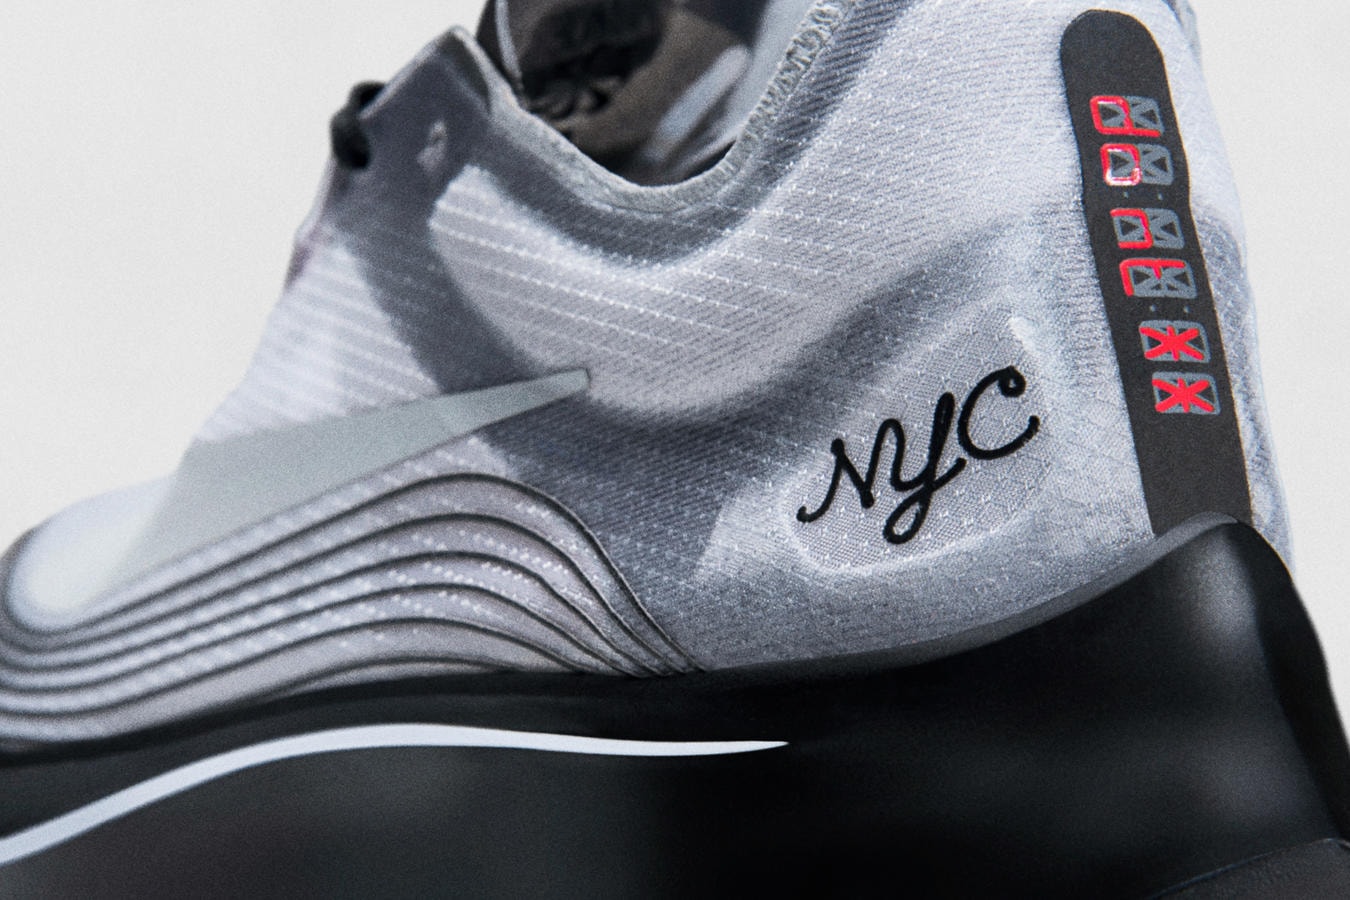 Nike Zoom Fly SP NYC 2017 November 2 Release Date Info New York City SNKRS Sneakers Shoes Footwear